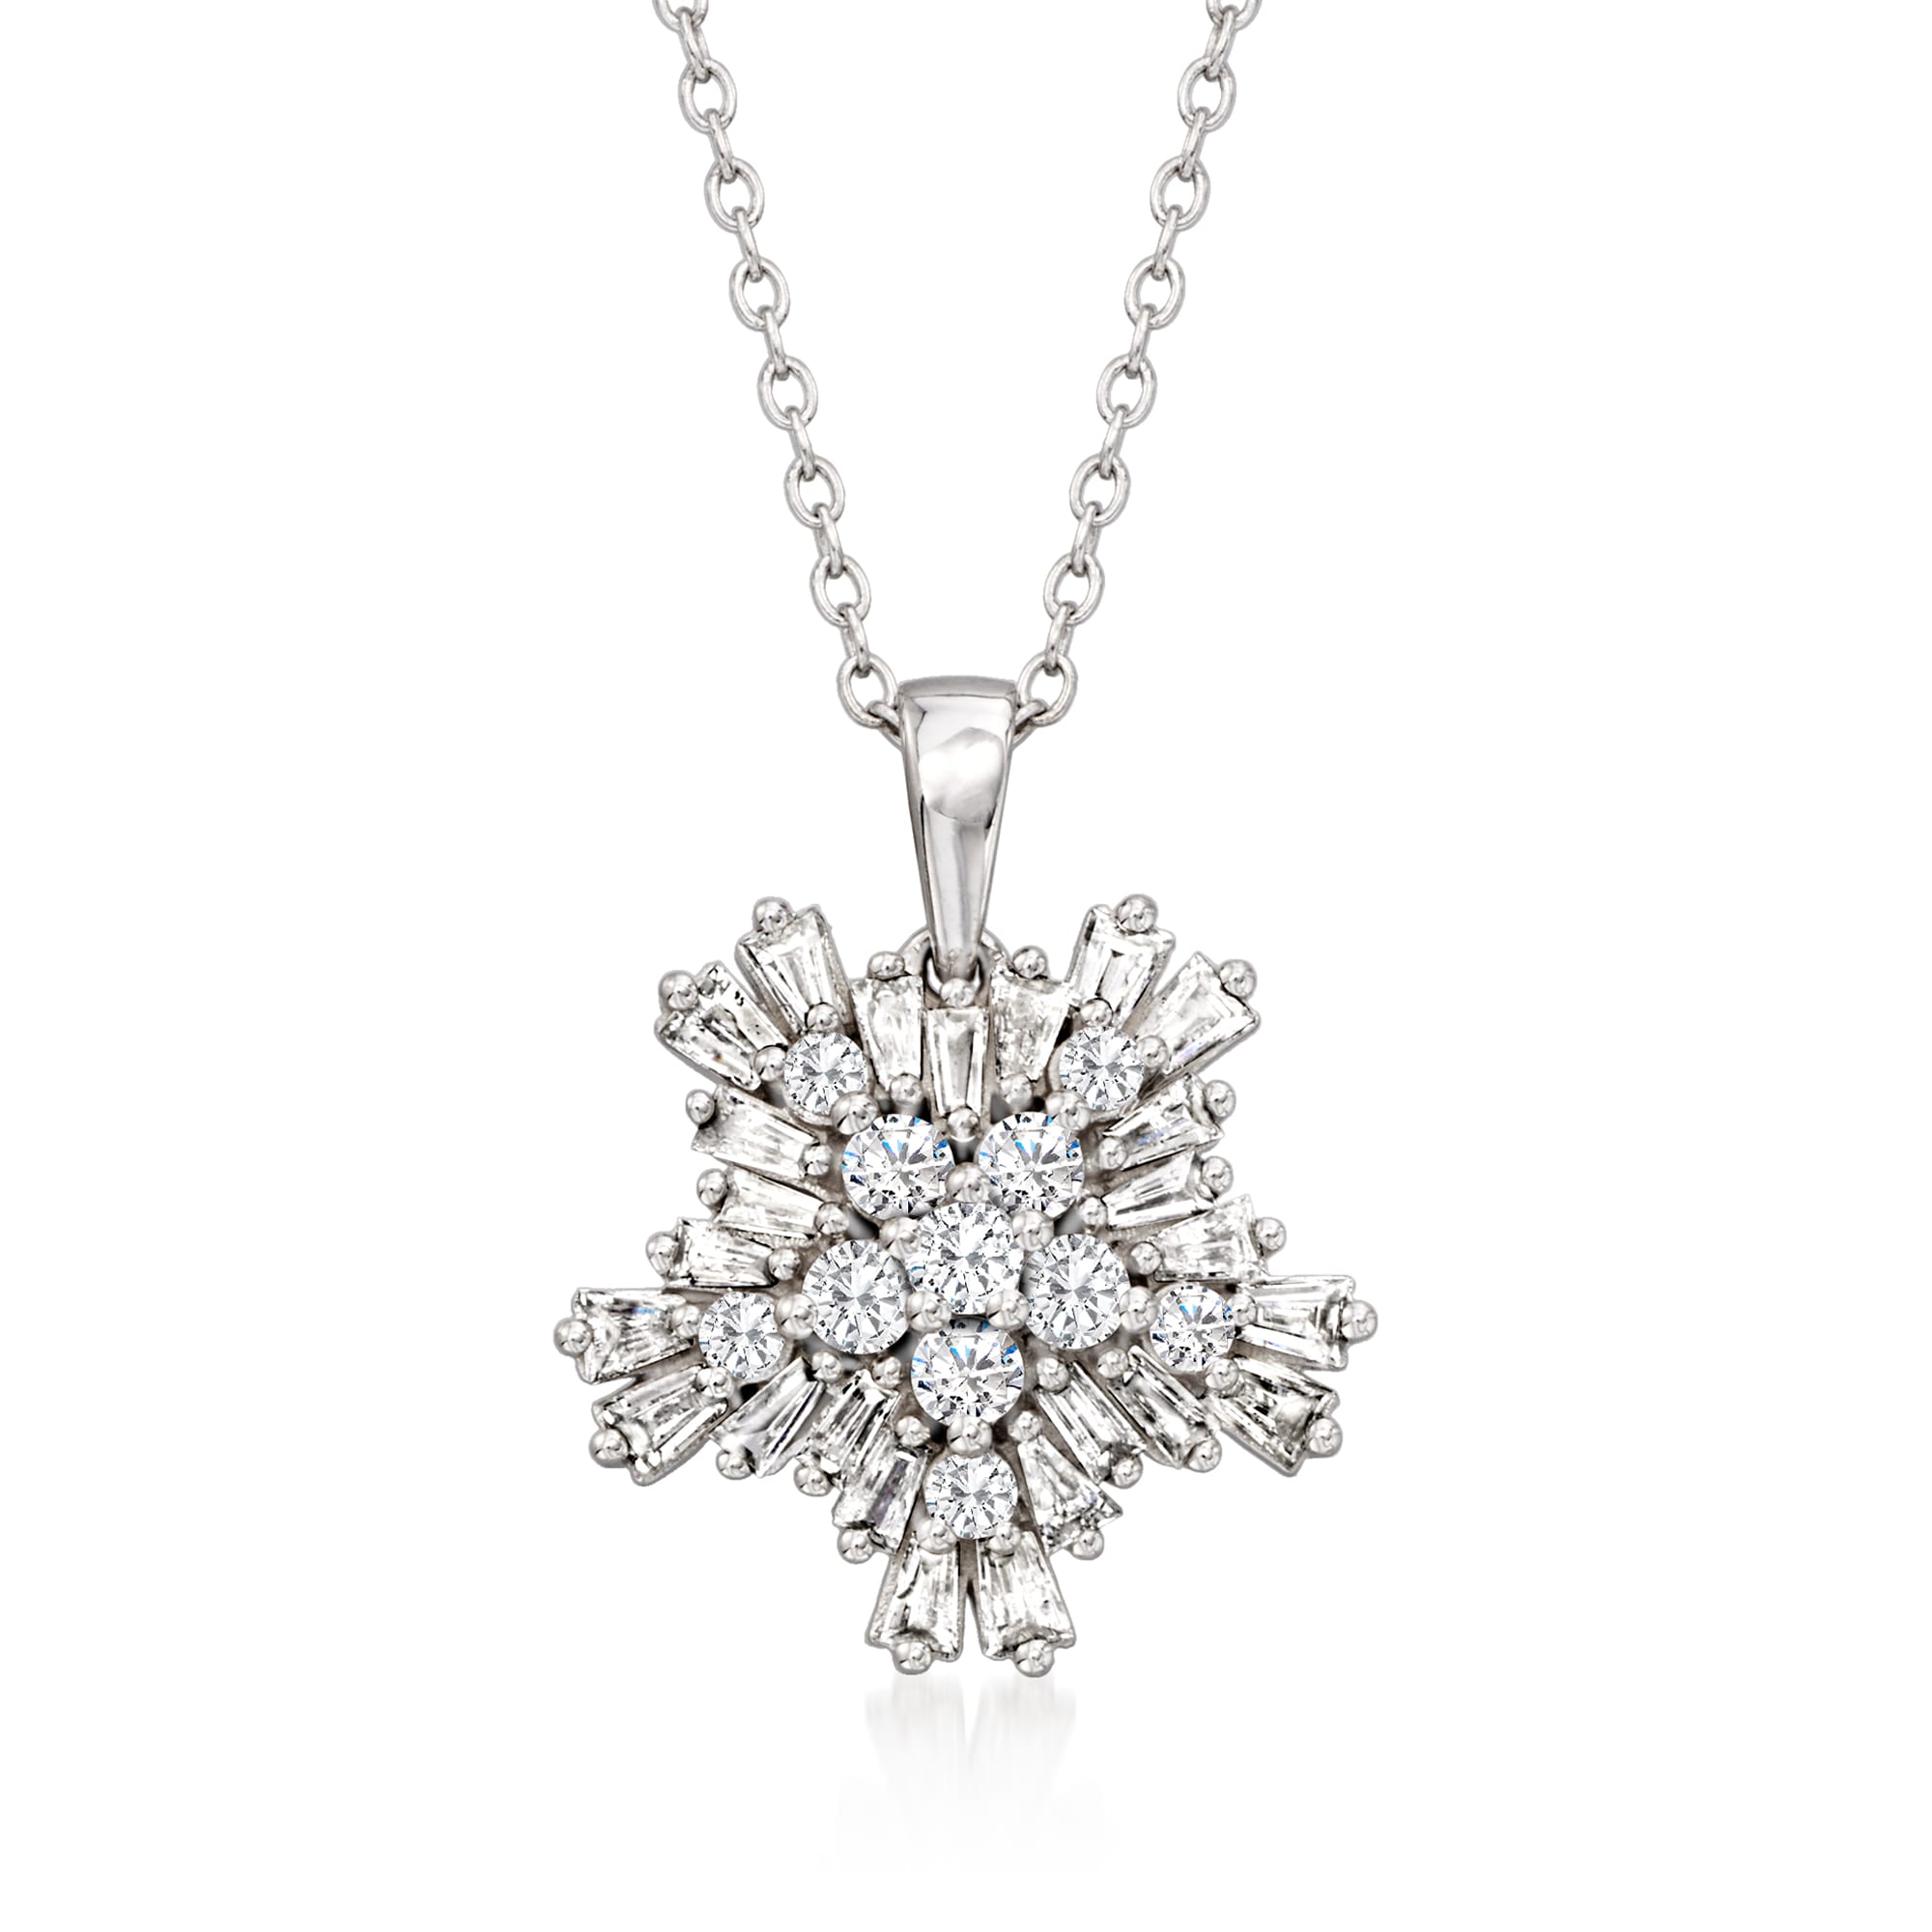 .75 ct. t.w. Diamond Snowflake Pendant Necklace in 14kt White Gold. 16 ...